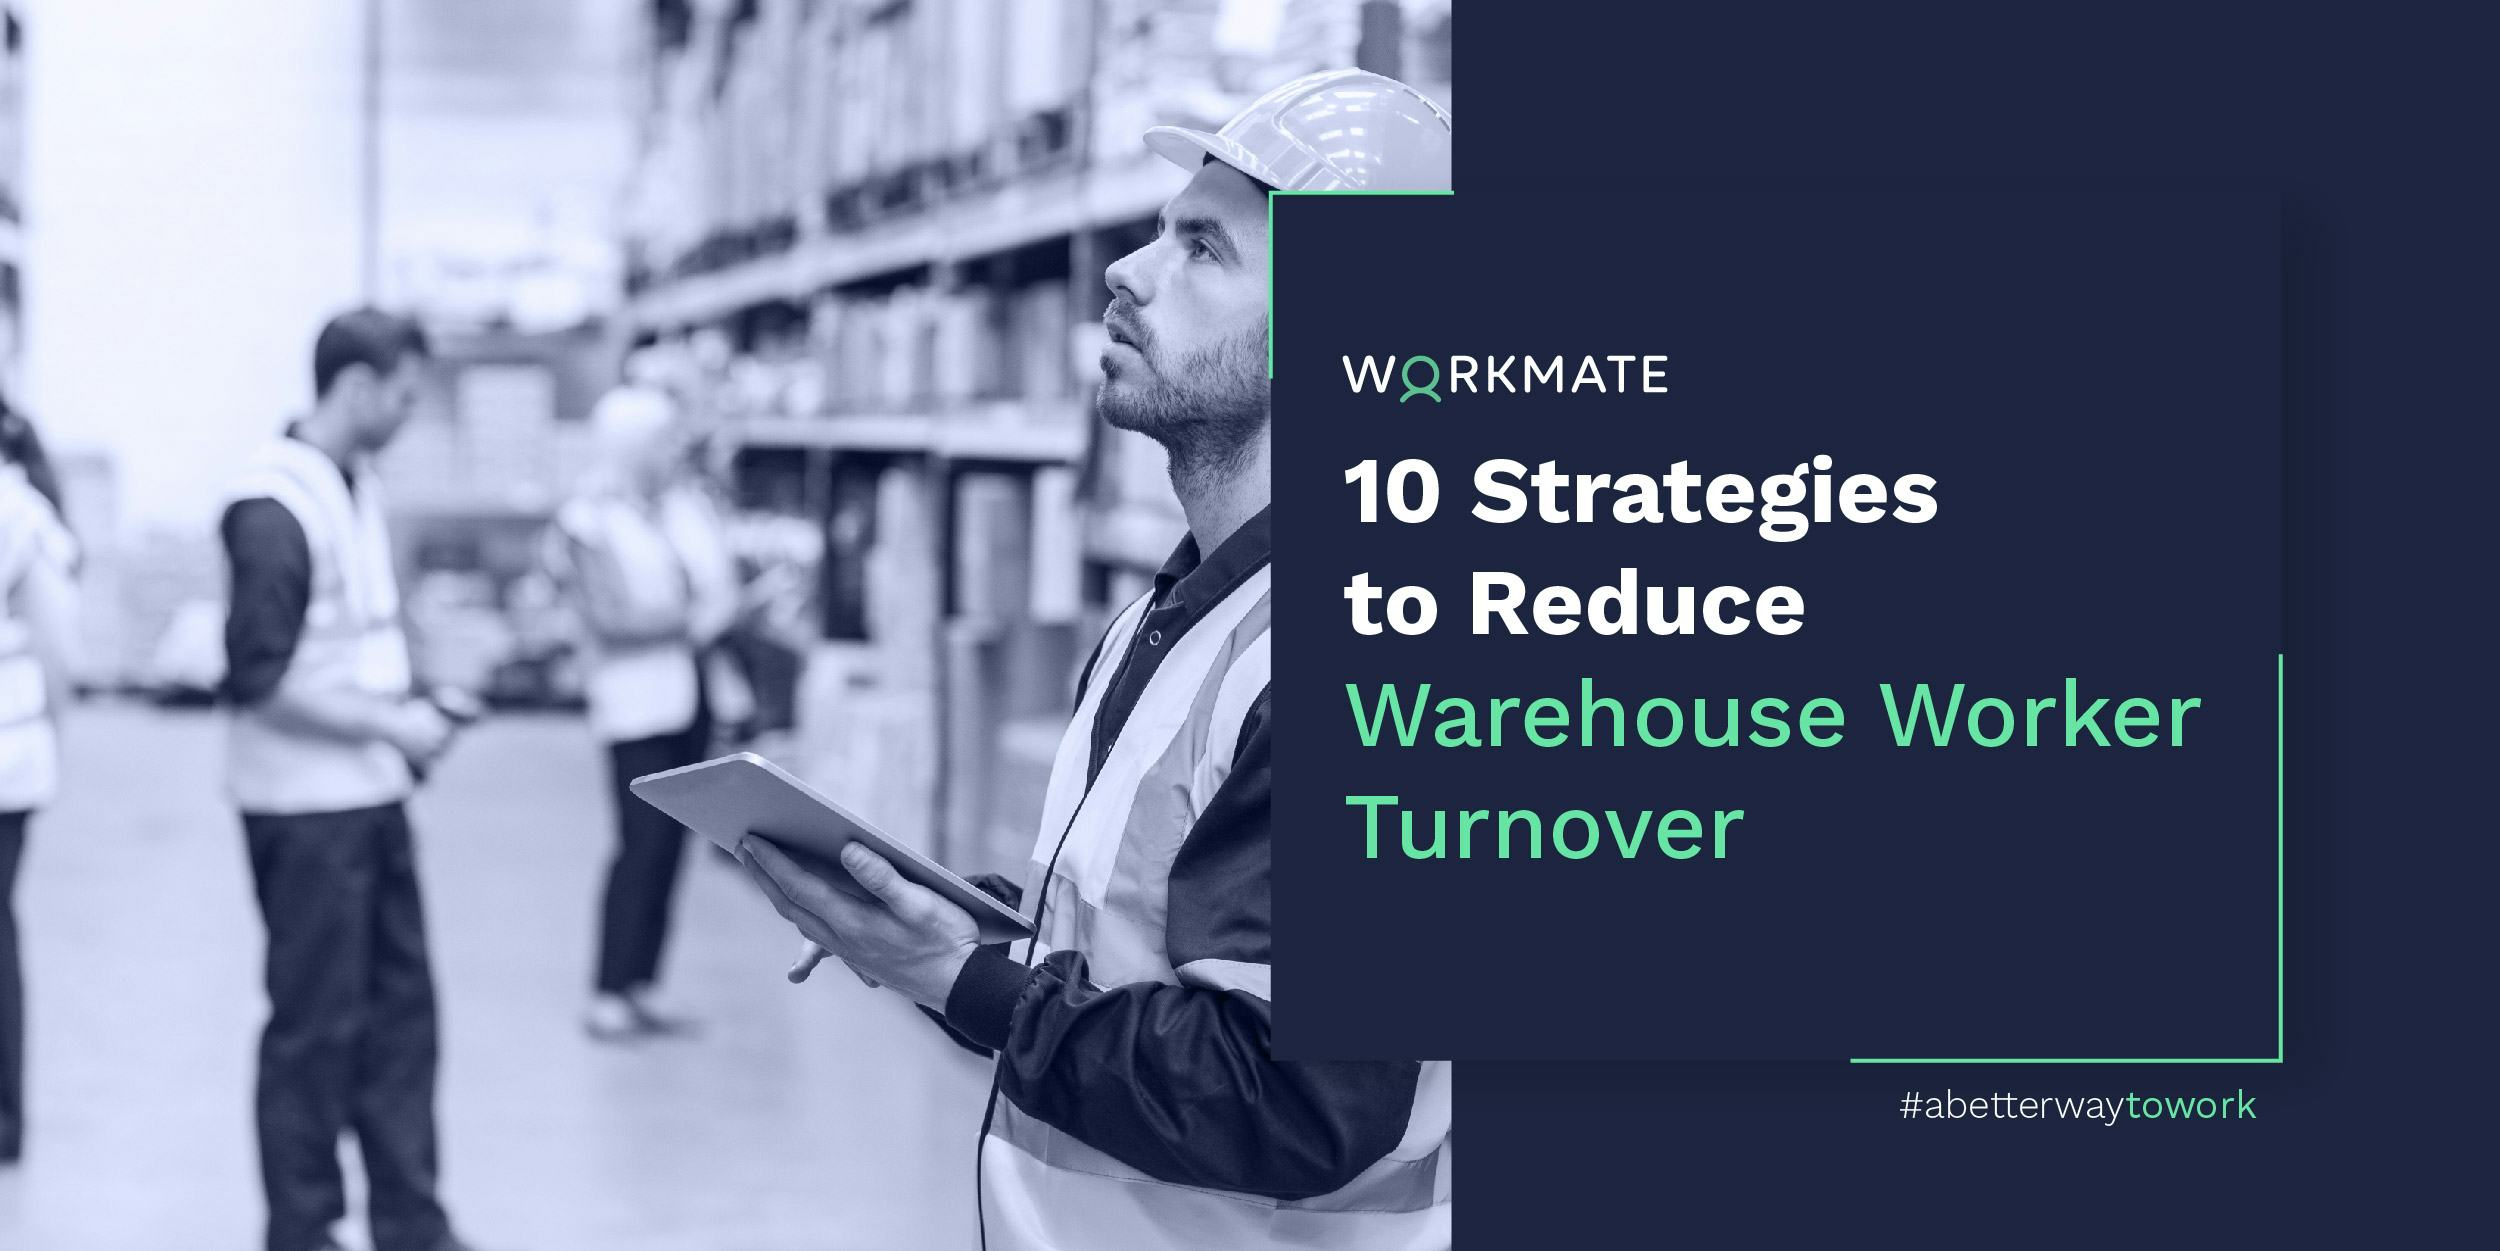 10 Strategies to Reduce Warehouse Worker Turnover